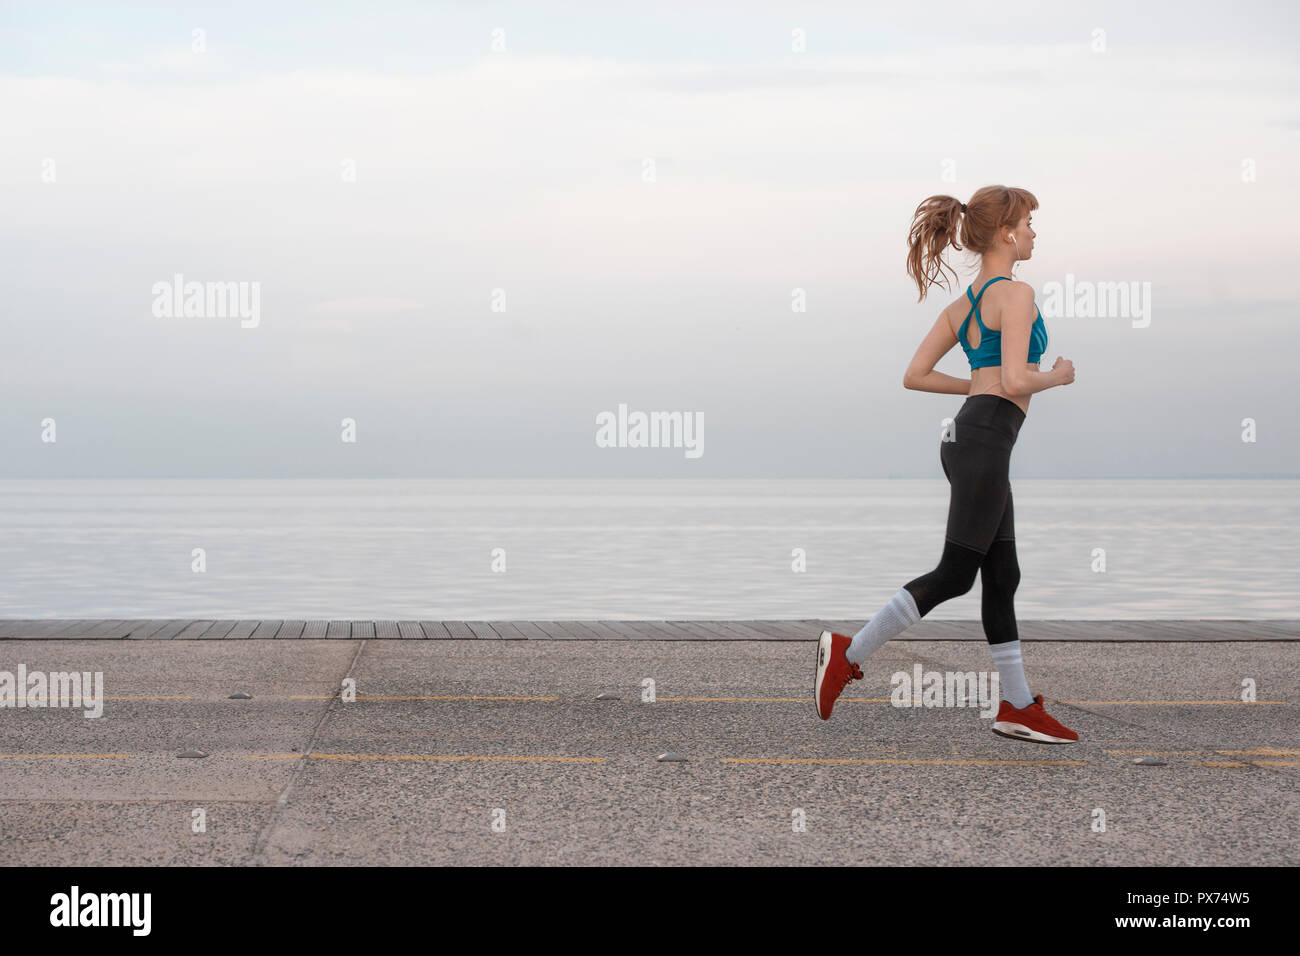 a woman jogging by the seaside in urban city environment Stock Photo